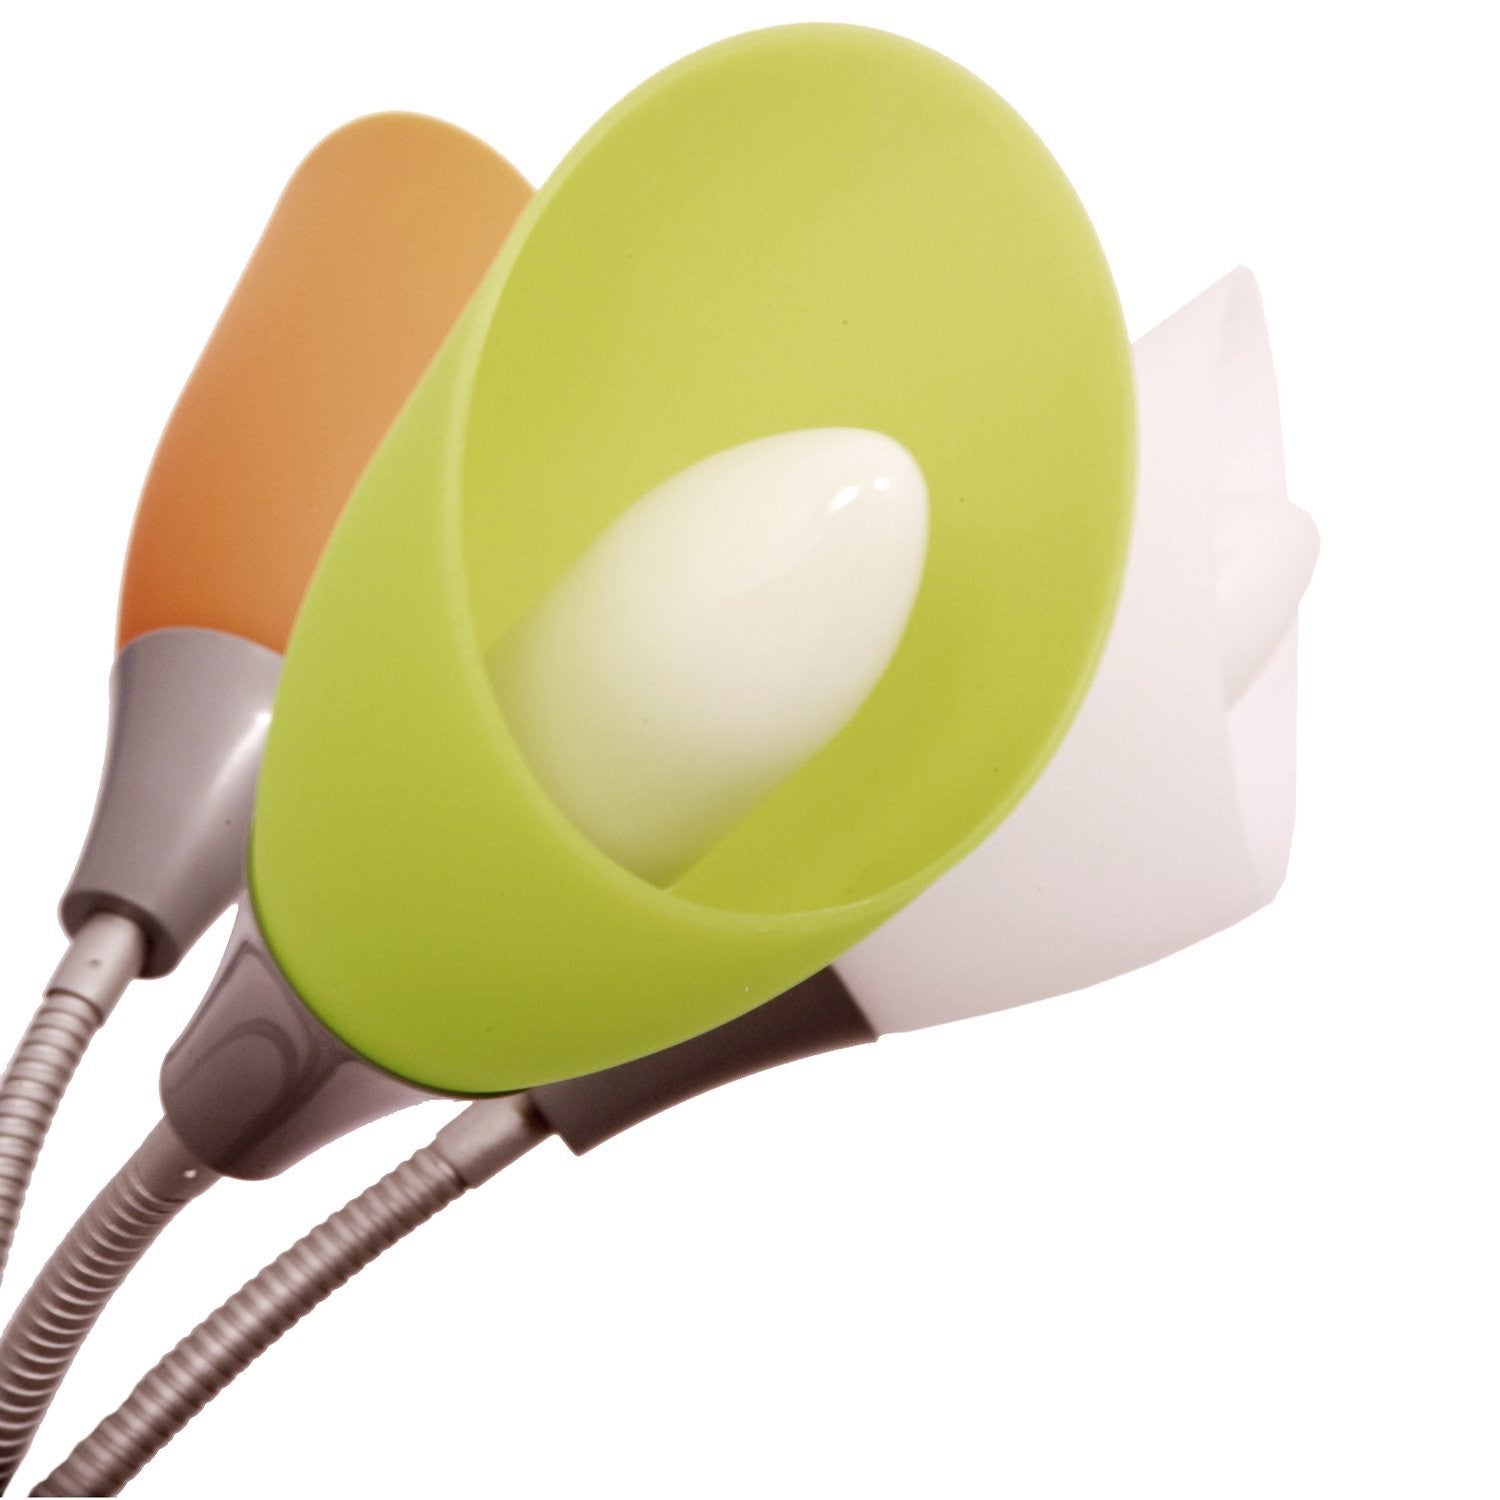 Shade replacement -Set of 5 Multicolored Acrylic Shades - LightAccents.com
 - 5